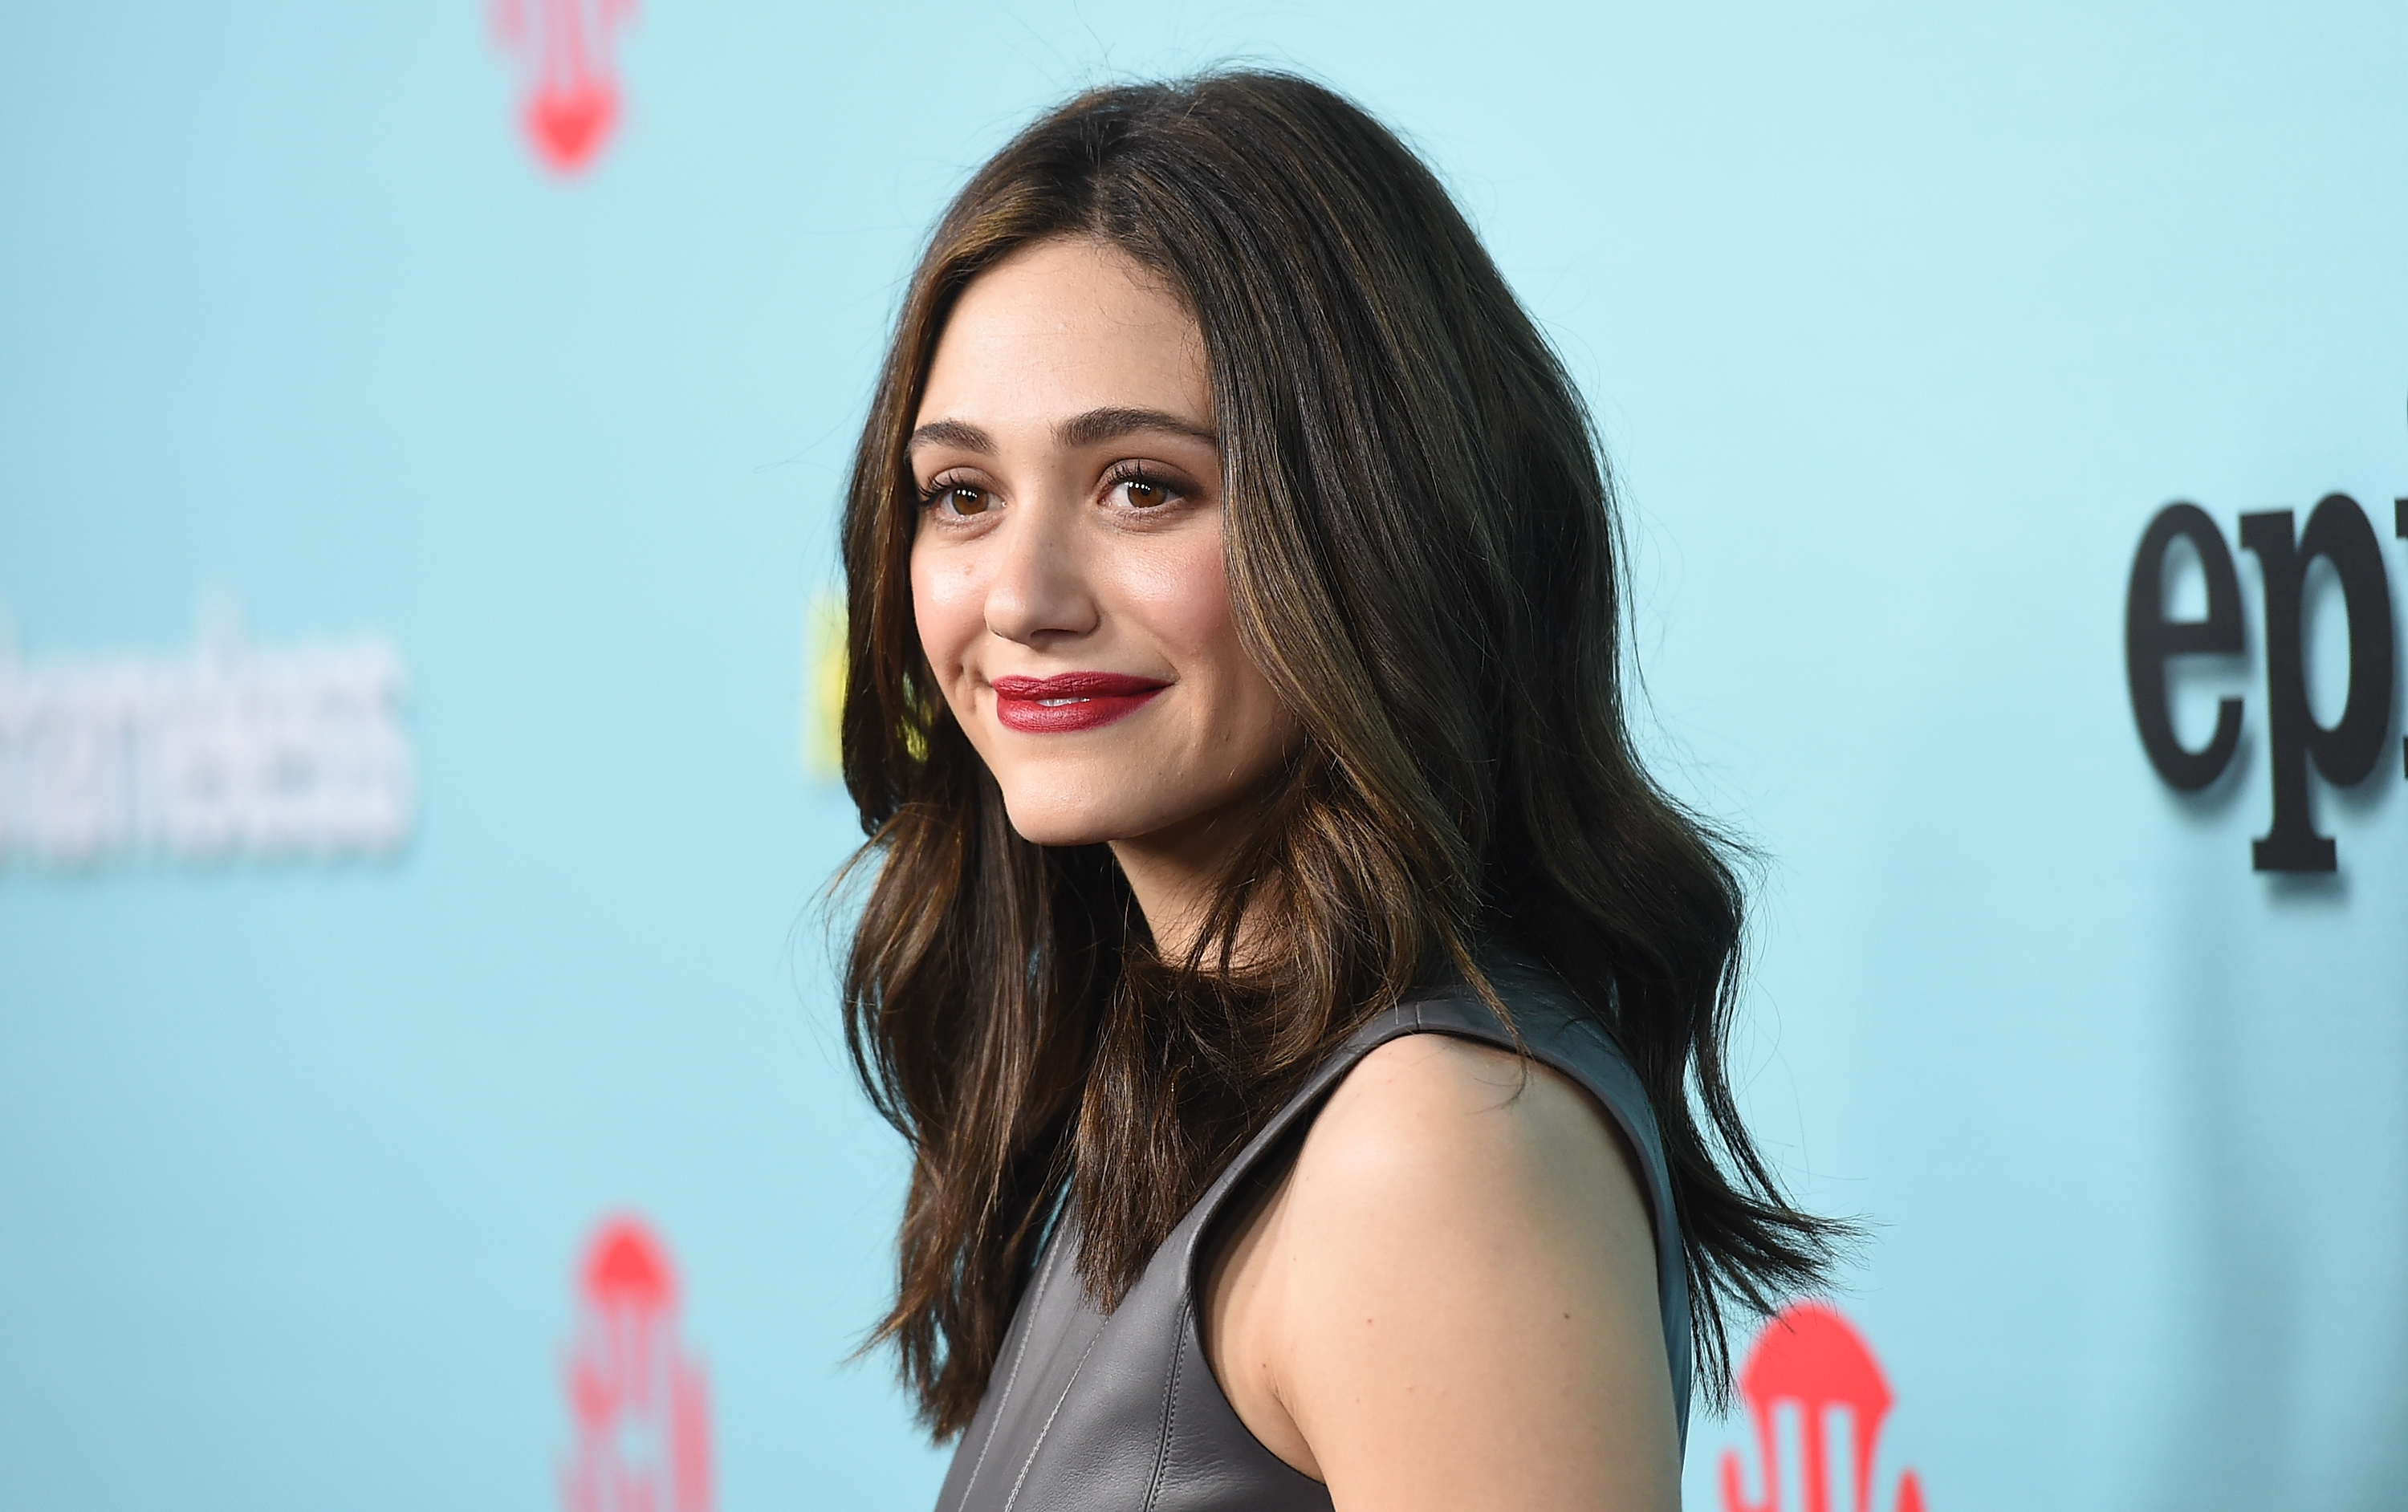 Fiona Gallagher actor Emmy Rossum on the red carpet at a 'Shameless' event.